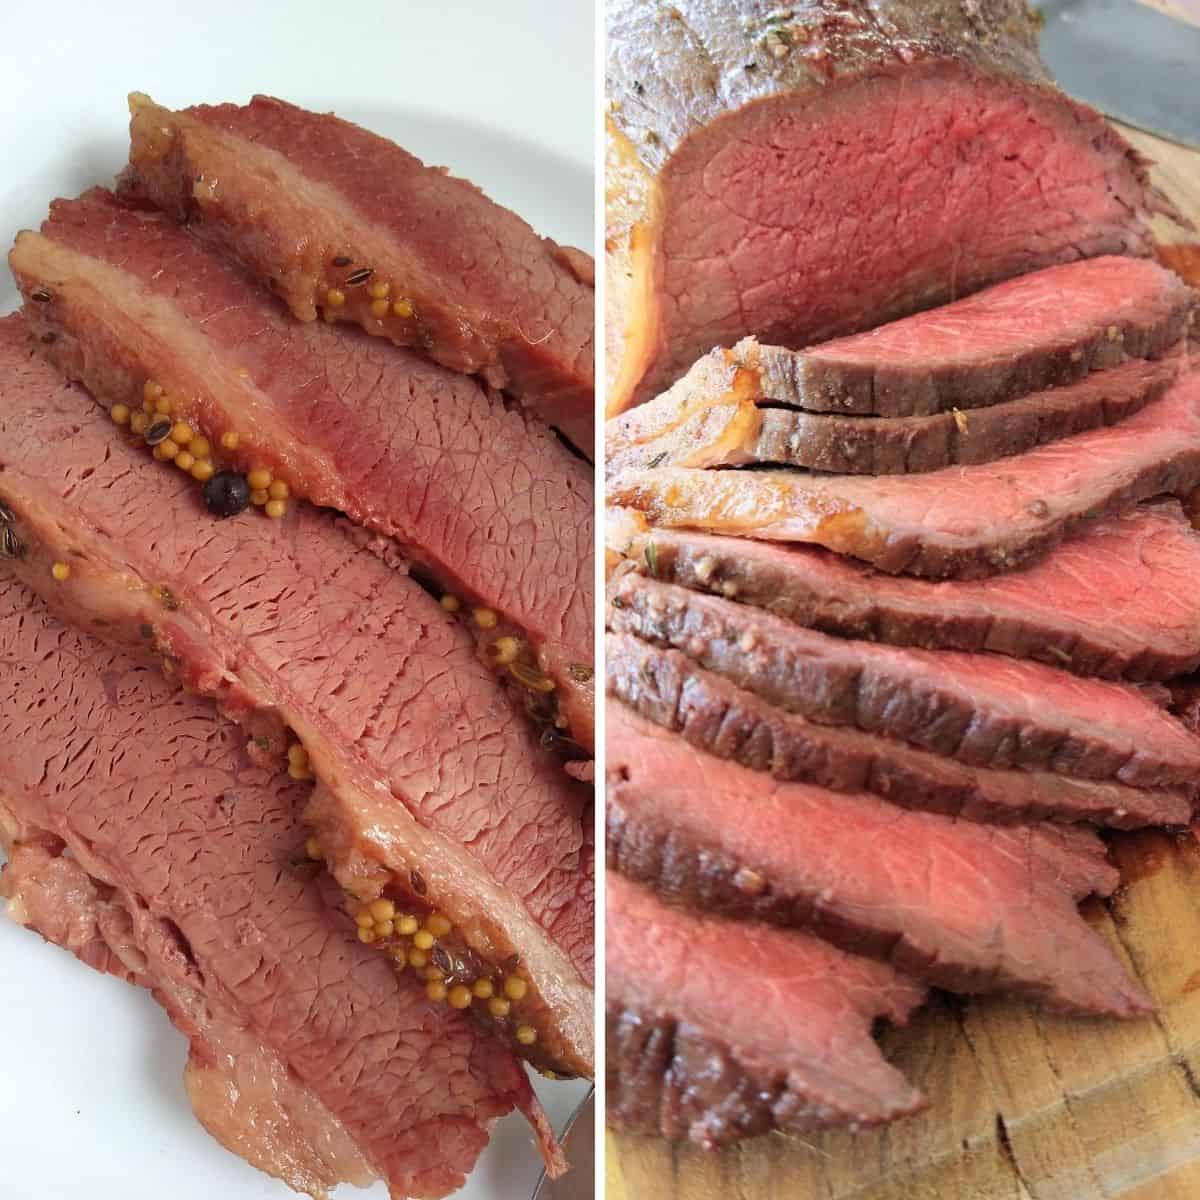 On the left is cooked slicked corned beef on a plate, and on the right is cooked sliced roast beef on a wood cutting board.